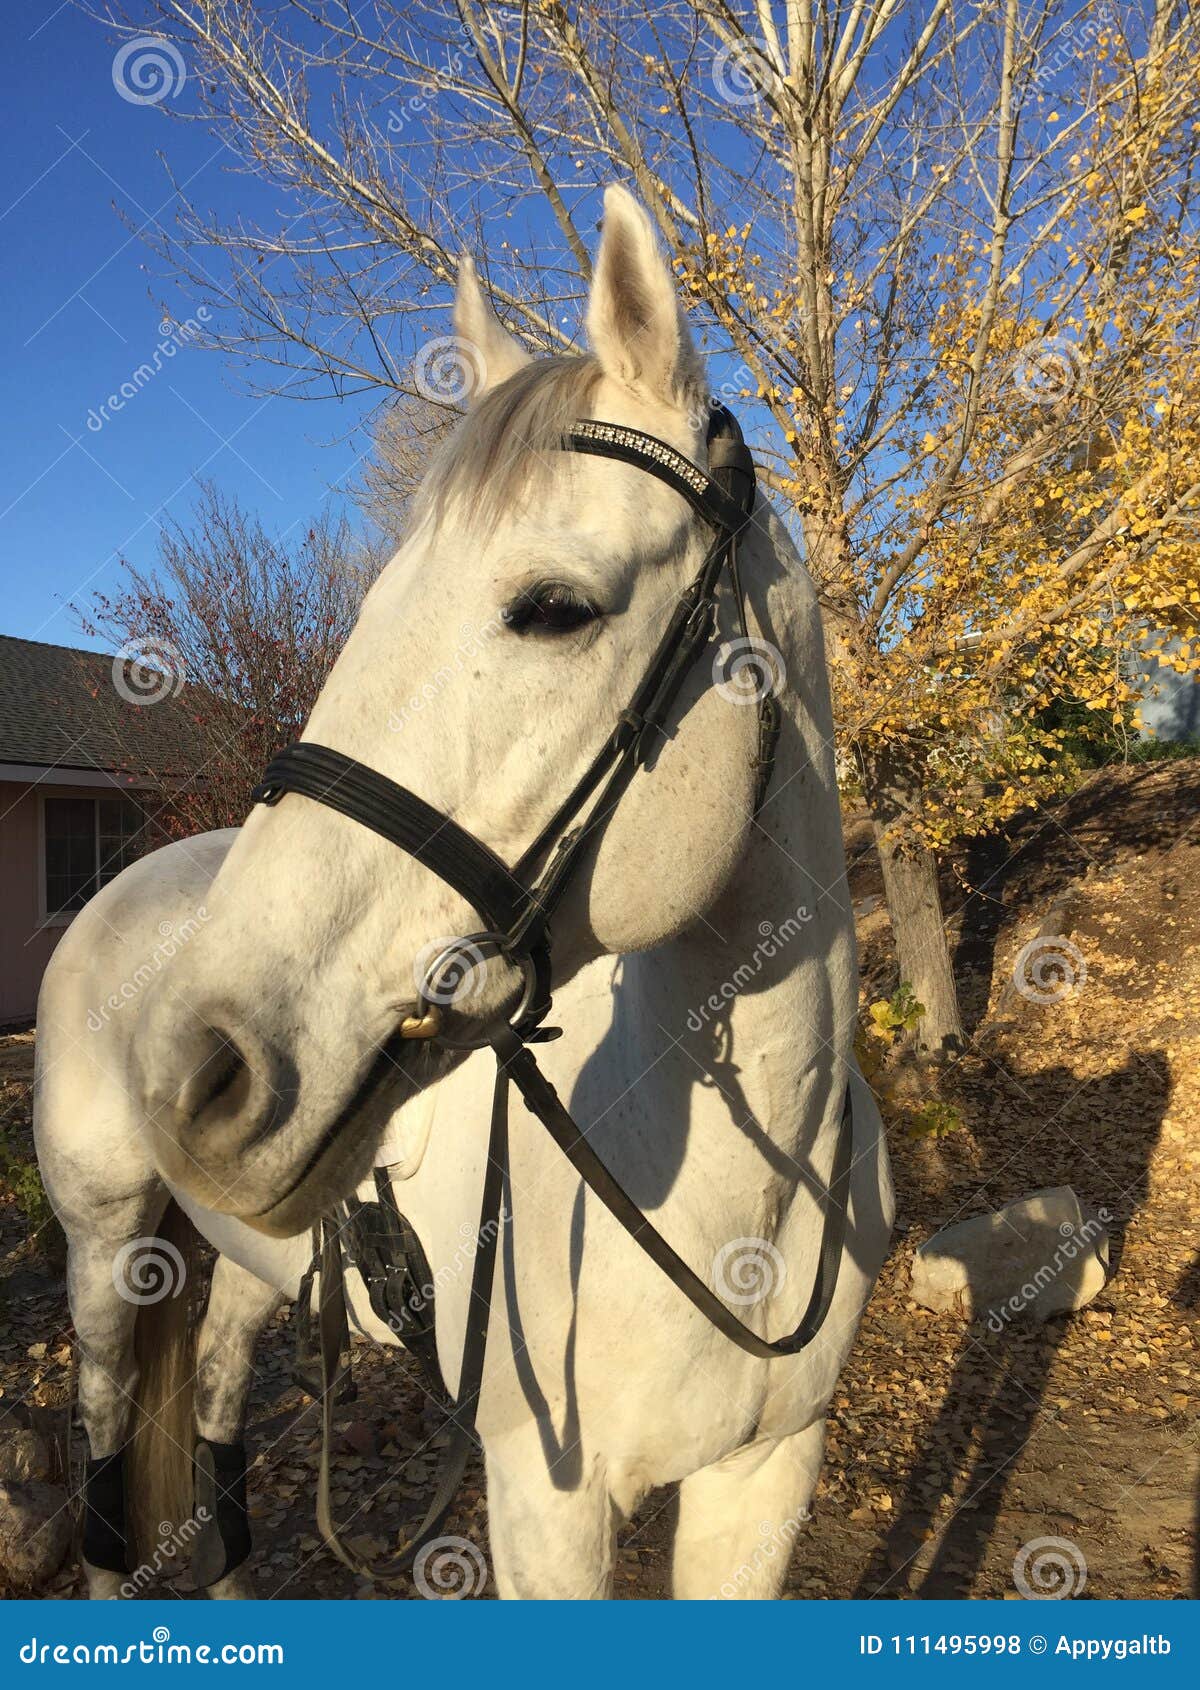 gray american quarter horse gelding with horse trailer, trees and autumn colors